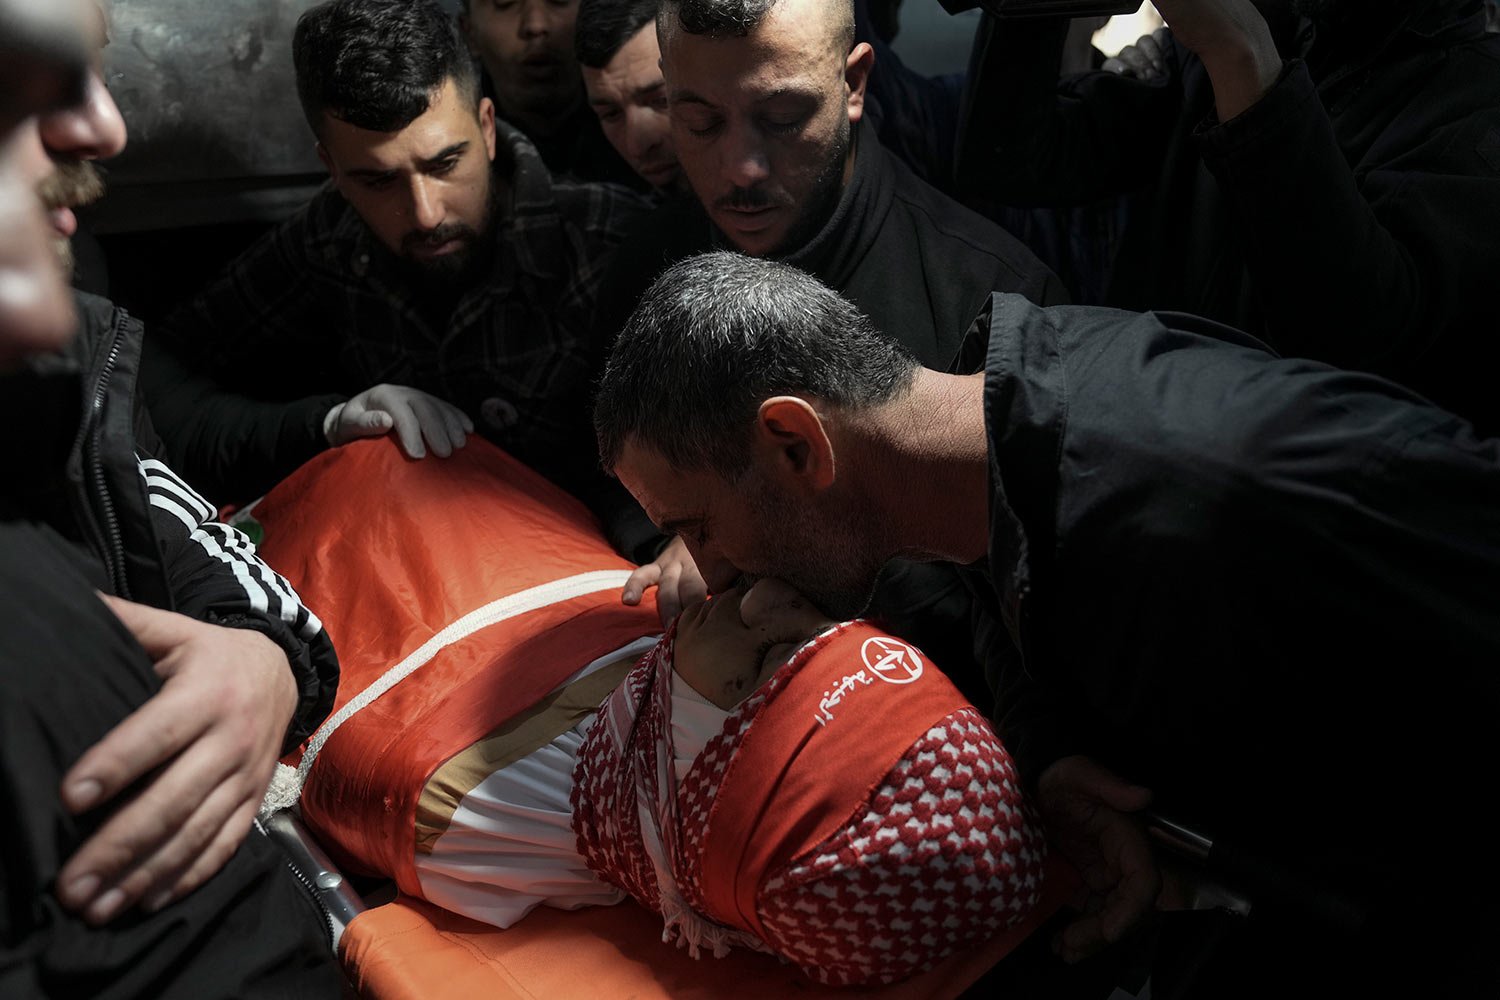  Mourners gather around the body of 14-year-old Palestinian Omar Khumour during his funeral in the West Bank city of Bethlehem, Monday, Jan. 16, 2023. (AP Photo/Mahmoud Illean) 